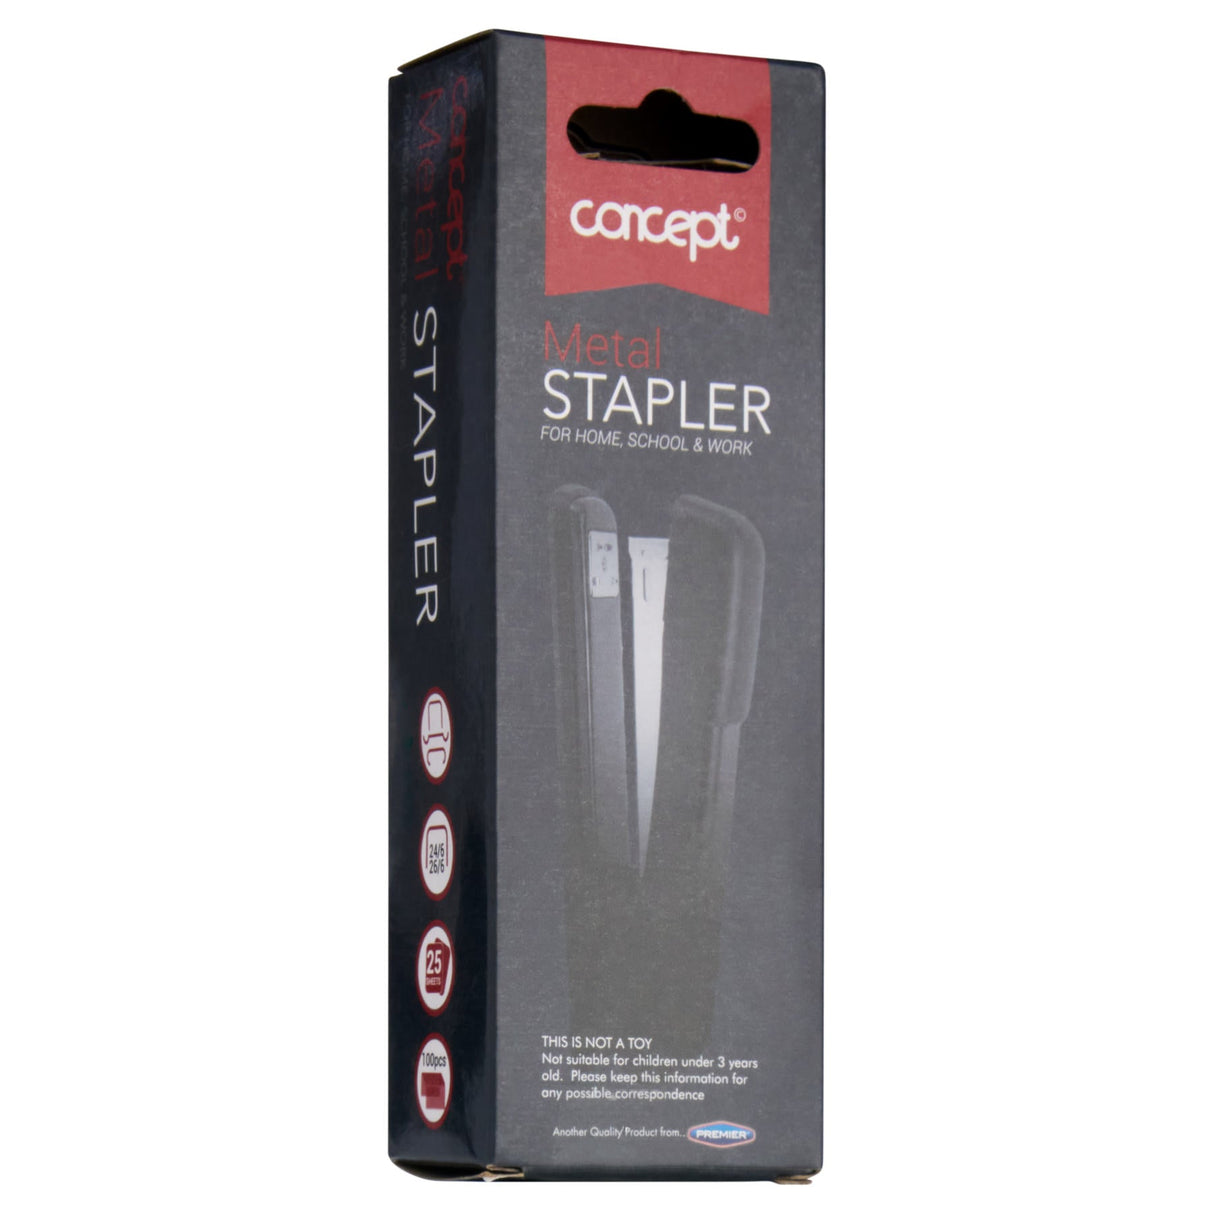 Concept Metal Stapler 26/6 Staples with a 25 Sheet Capacity | Stationery Shop UK